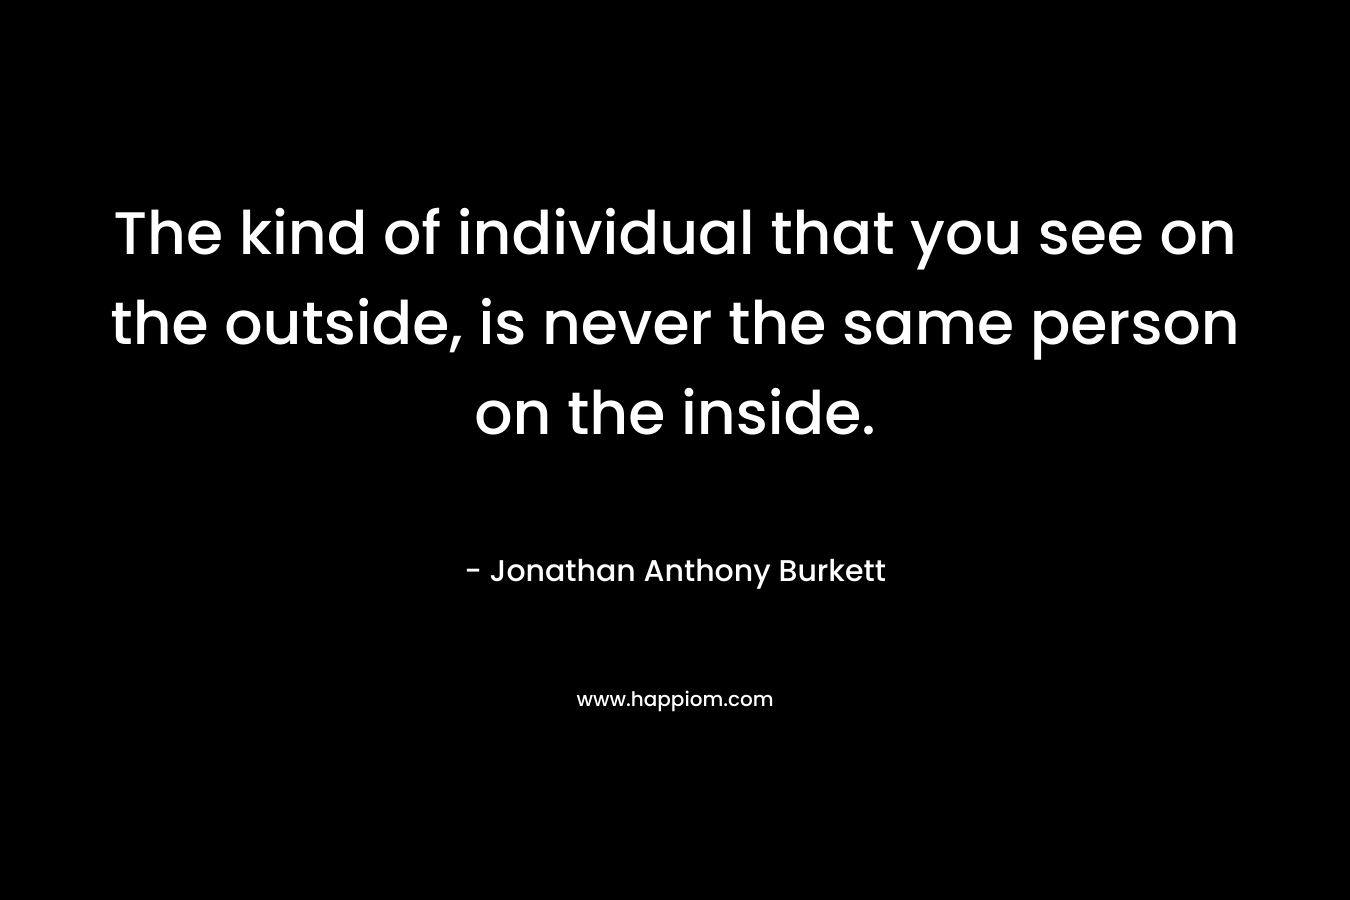 The kind of individual that you see on the outside, is never the same person on the inside.